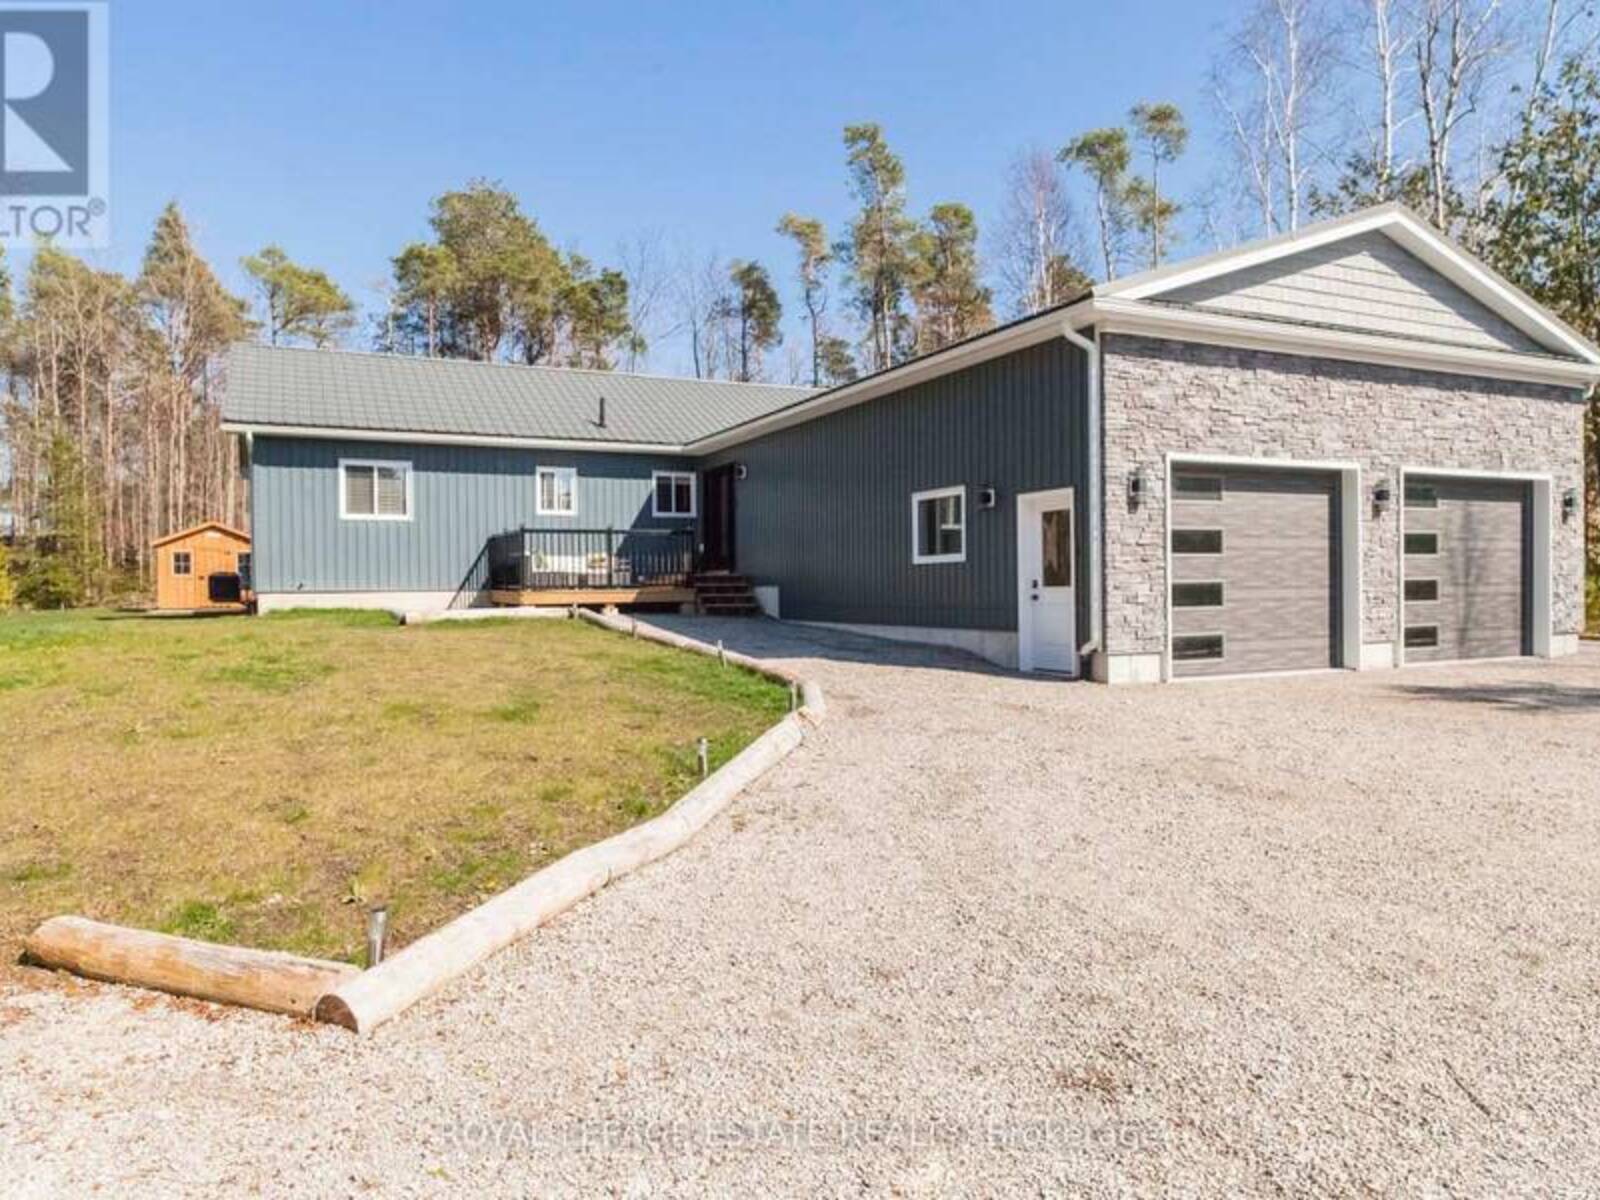 31 PINE FOREST DR, South Bruce Peninsula, Ontario N0H 2G0